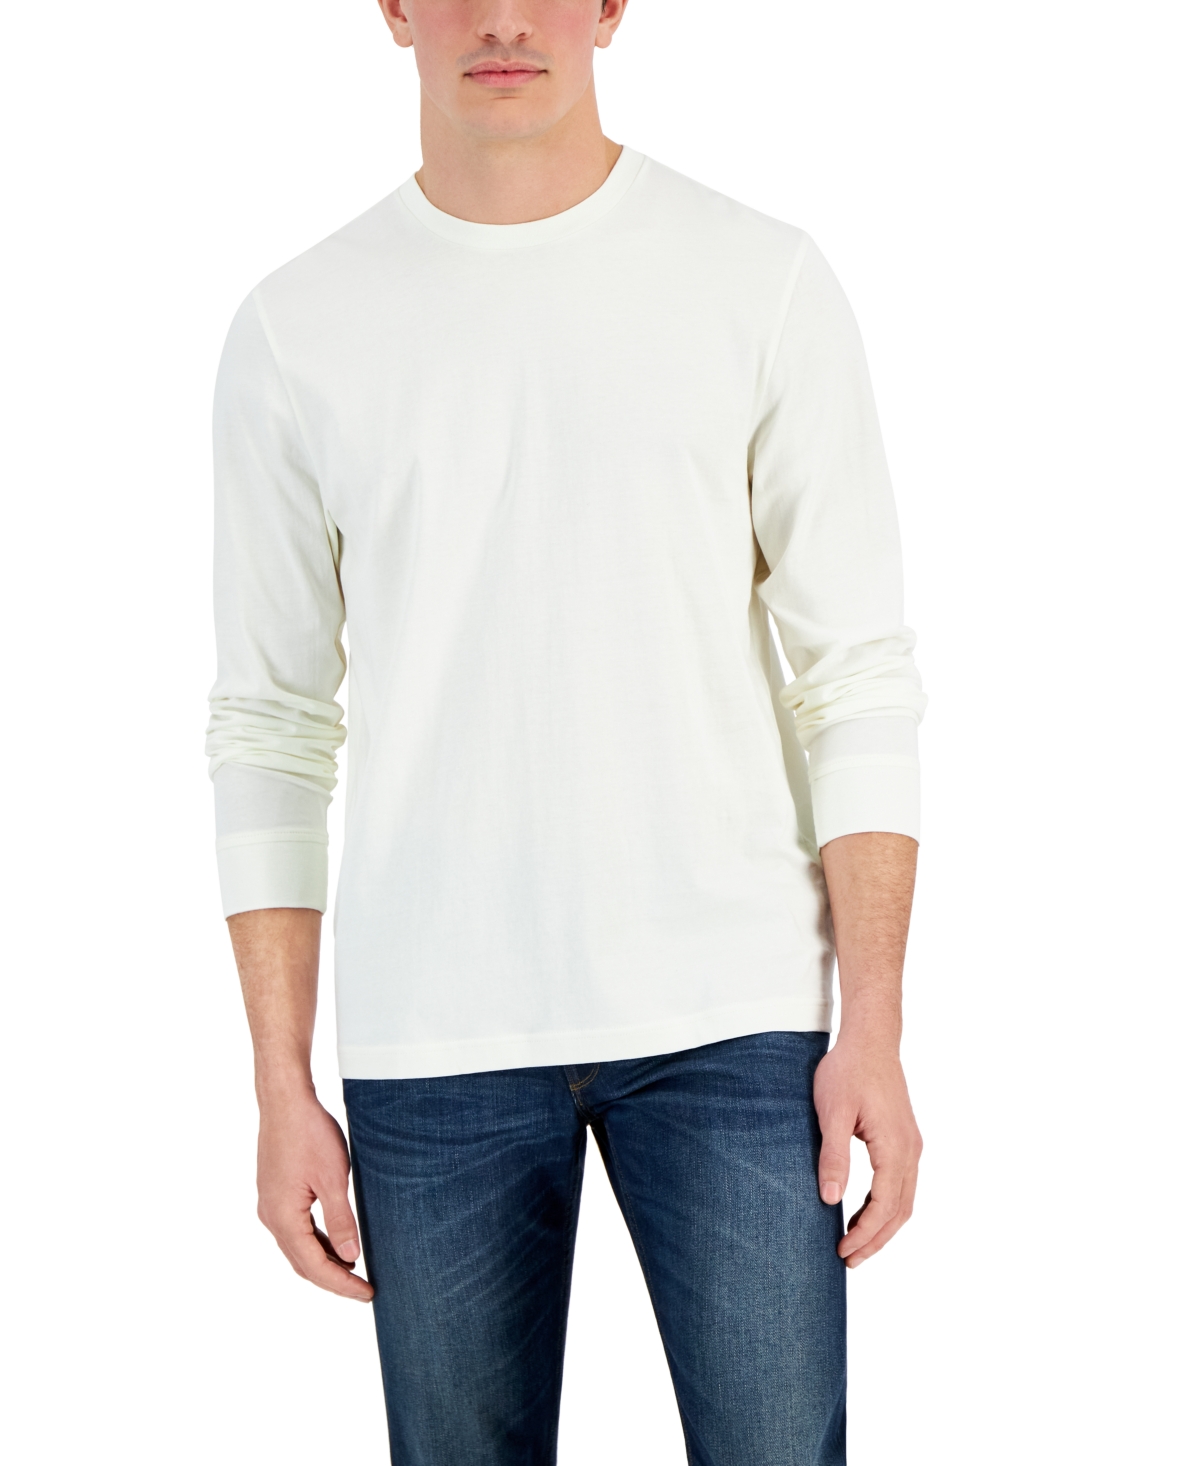 Men's Solid Turtleneck Shirt, Created for Macy's